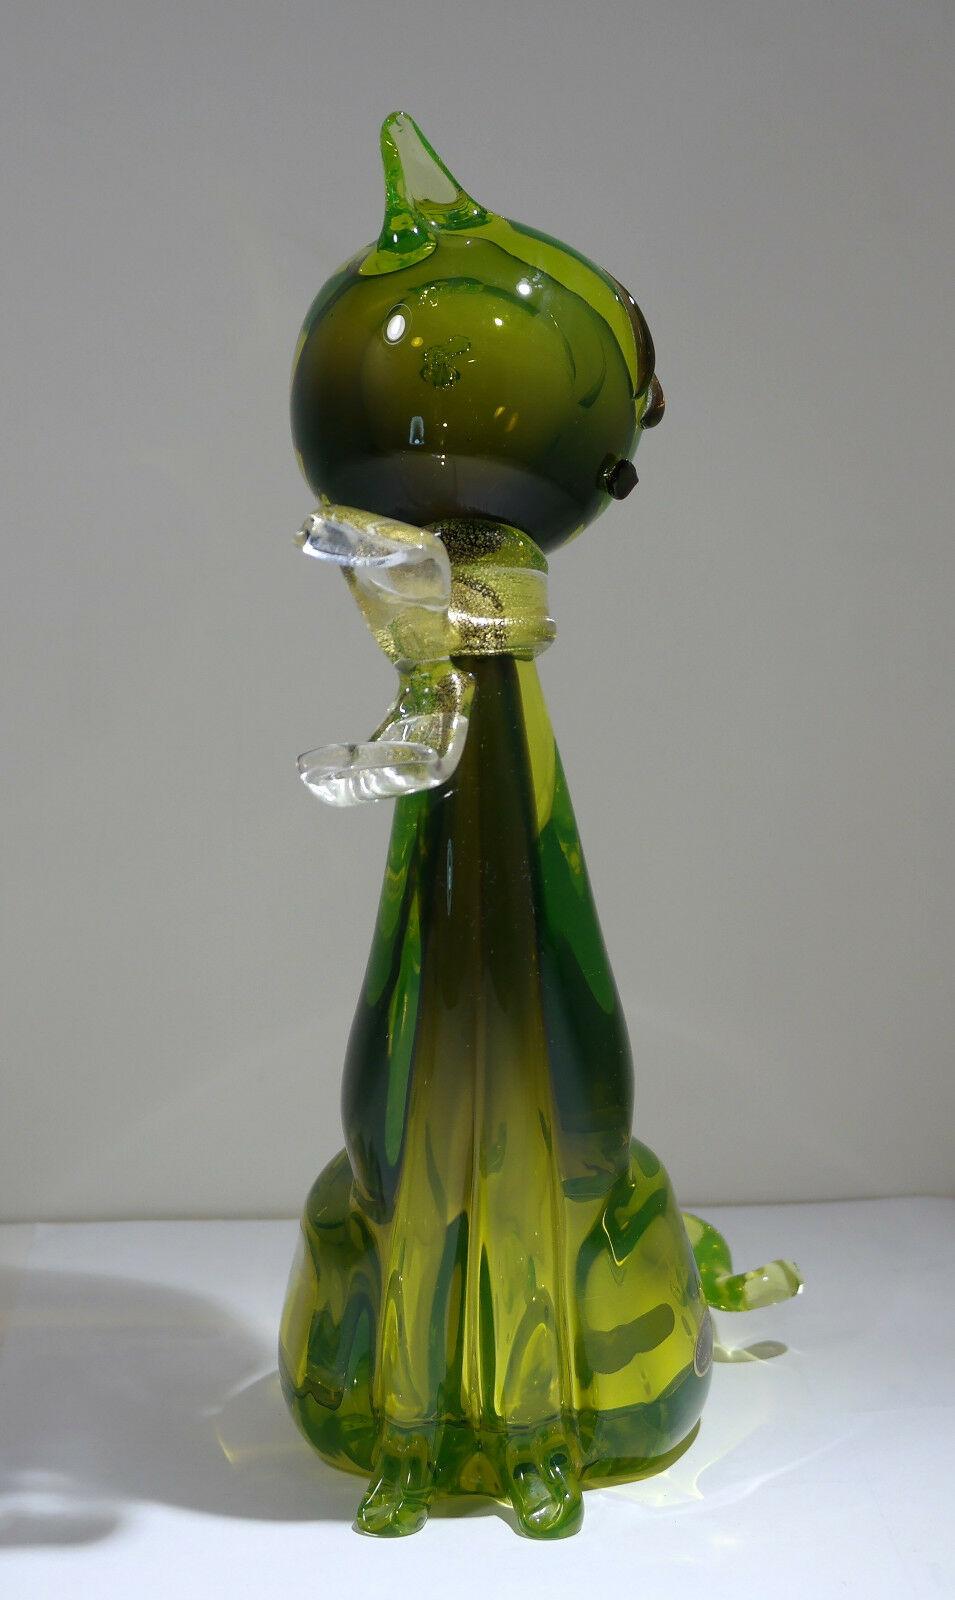 Midcentury Murano art glass modern cat sculpture in green by Alfredo Barbini. Iconic stylized feline figure from the Italian glass master / atelier, deep olive green at center, elongated proportions, gently swayed figure with whimsical collar /